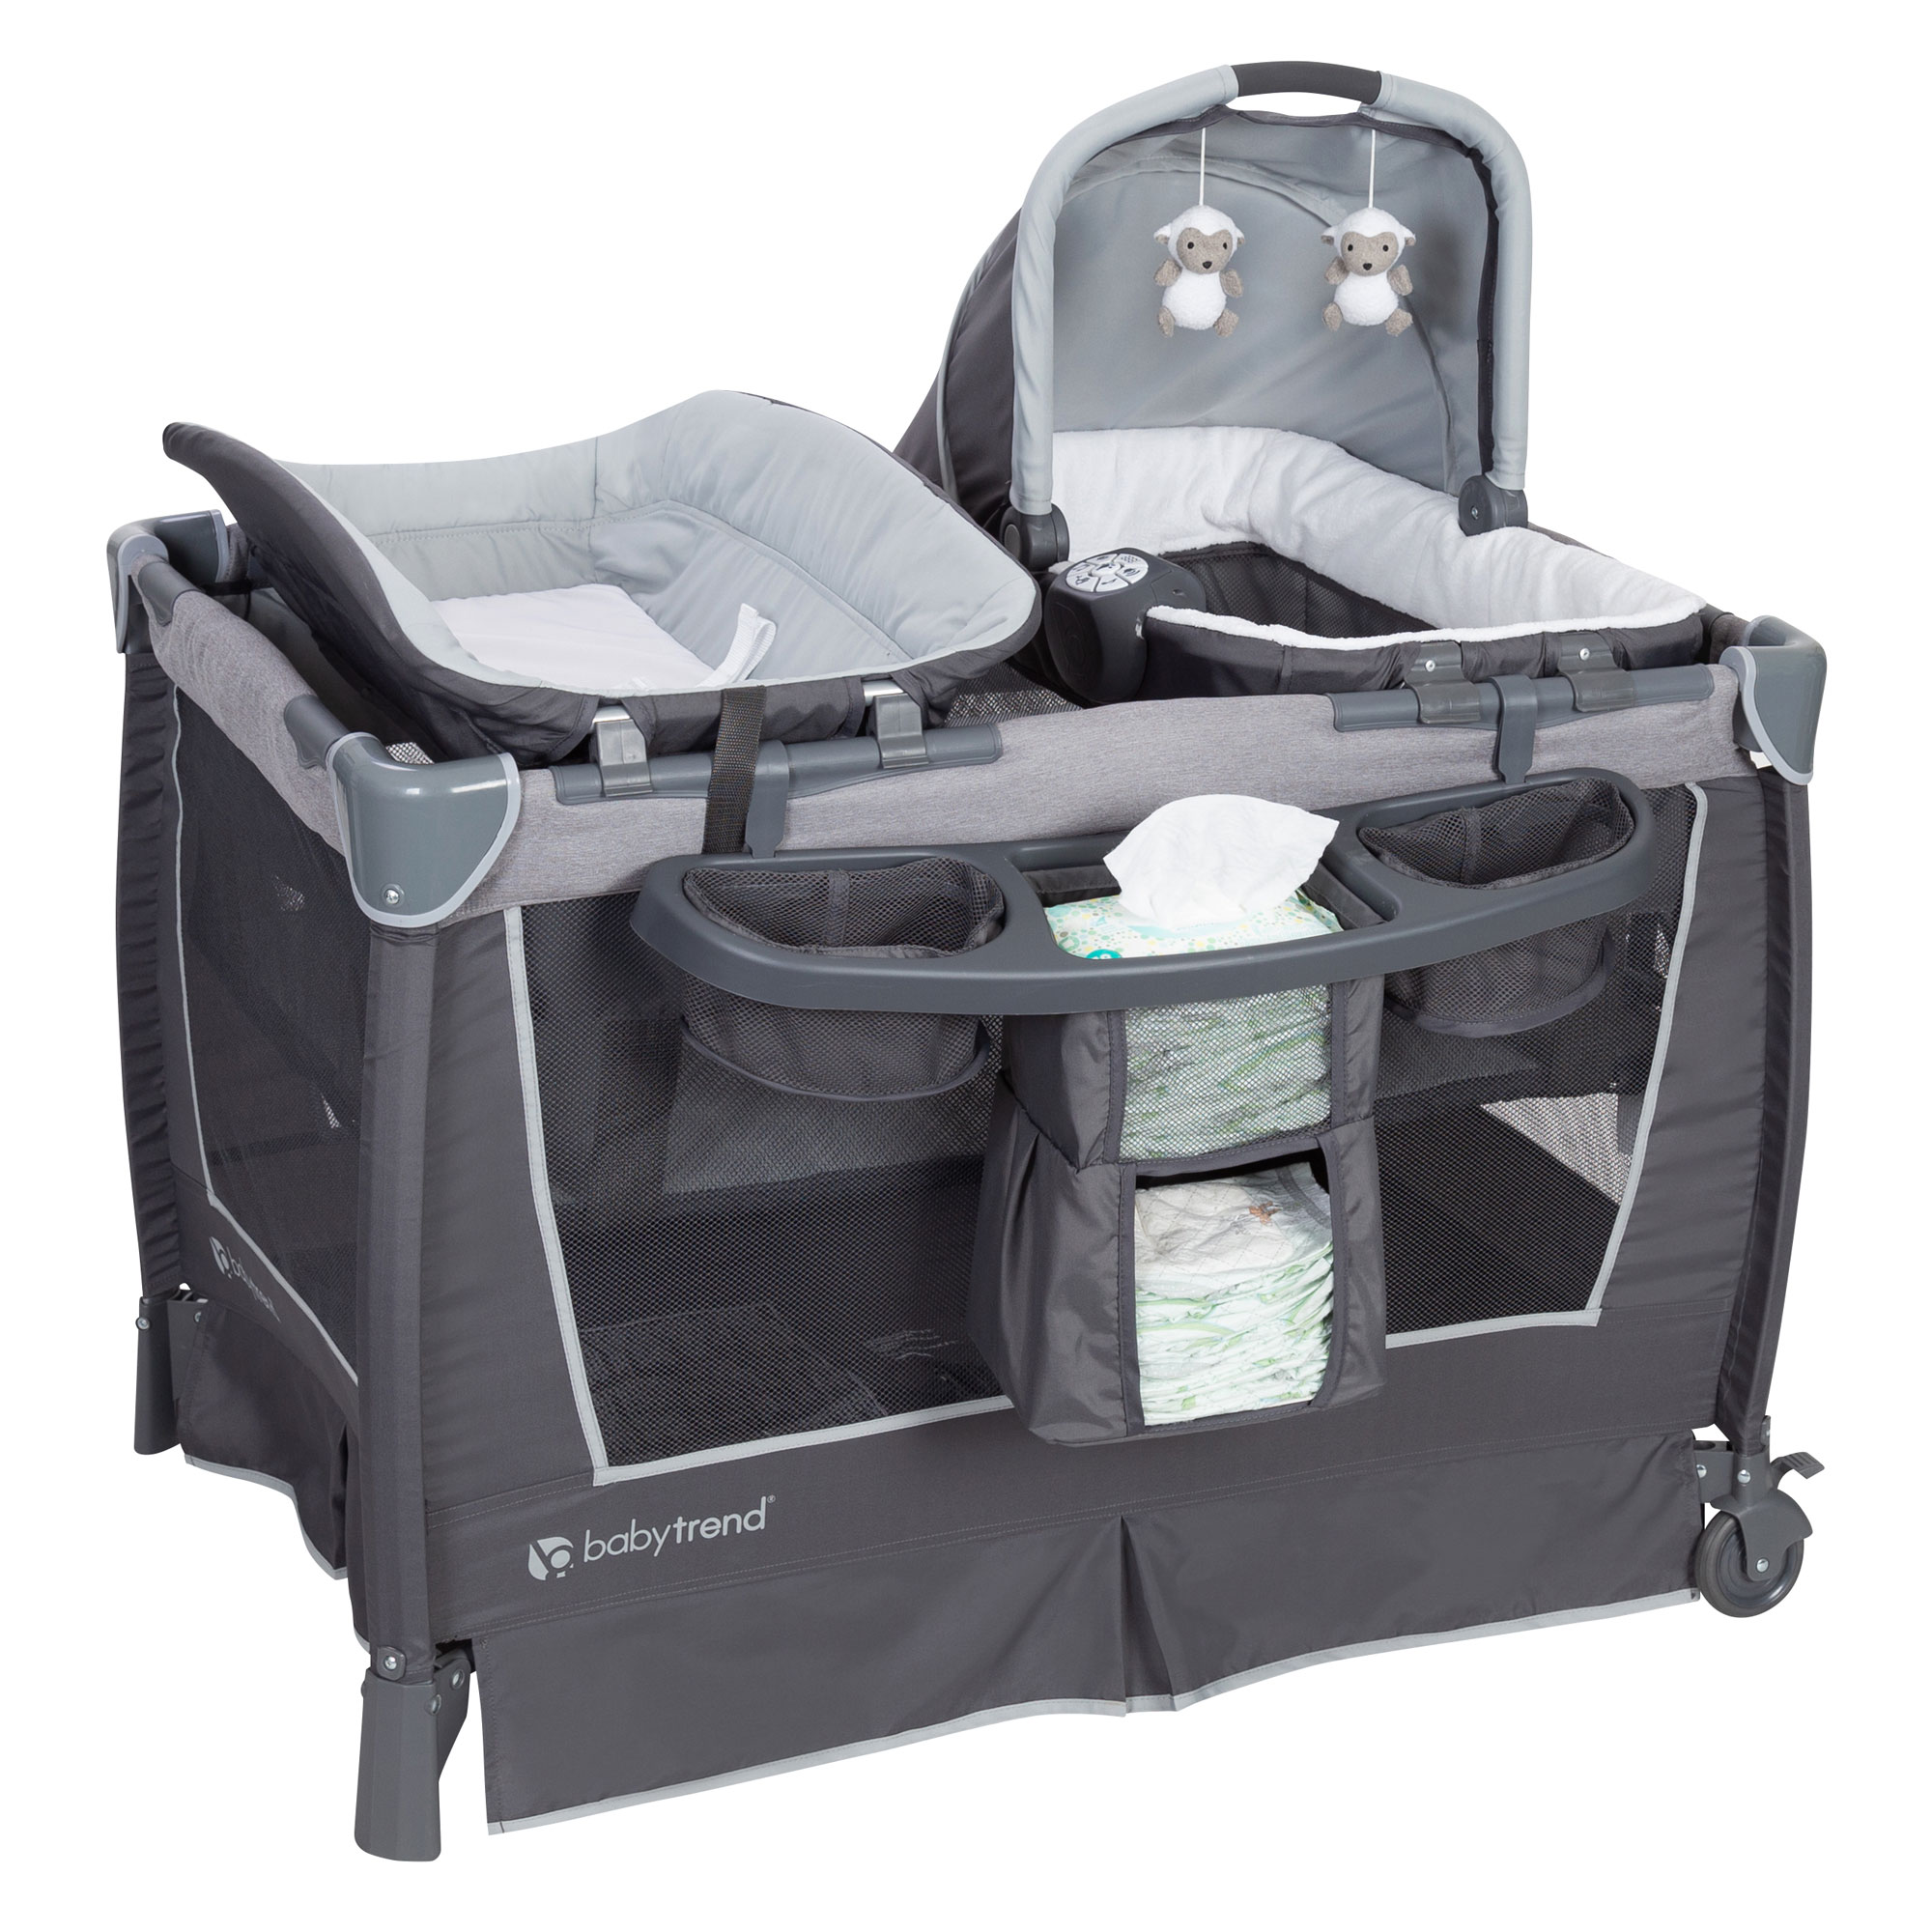 Baby Trend Retreat Nursery Center Playard with Bassinet and Travel Bag - Robin Gray - Gray - image 1 of 11